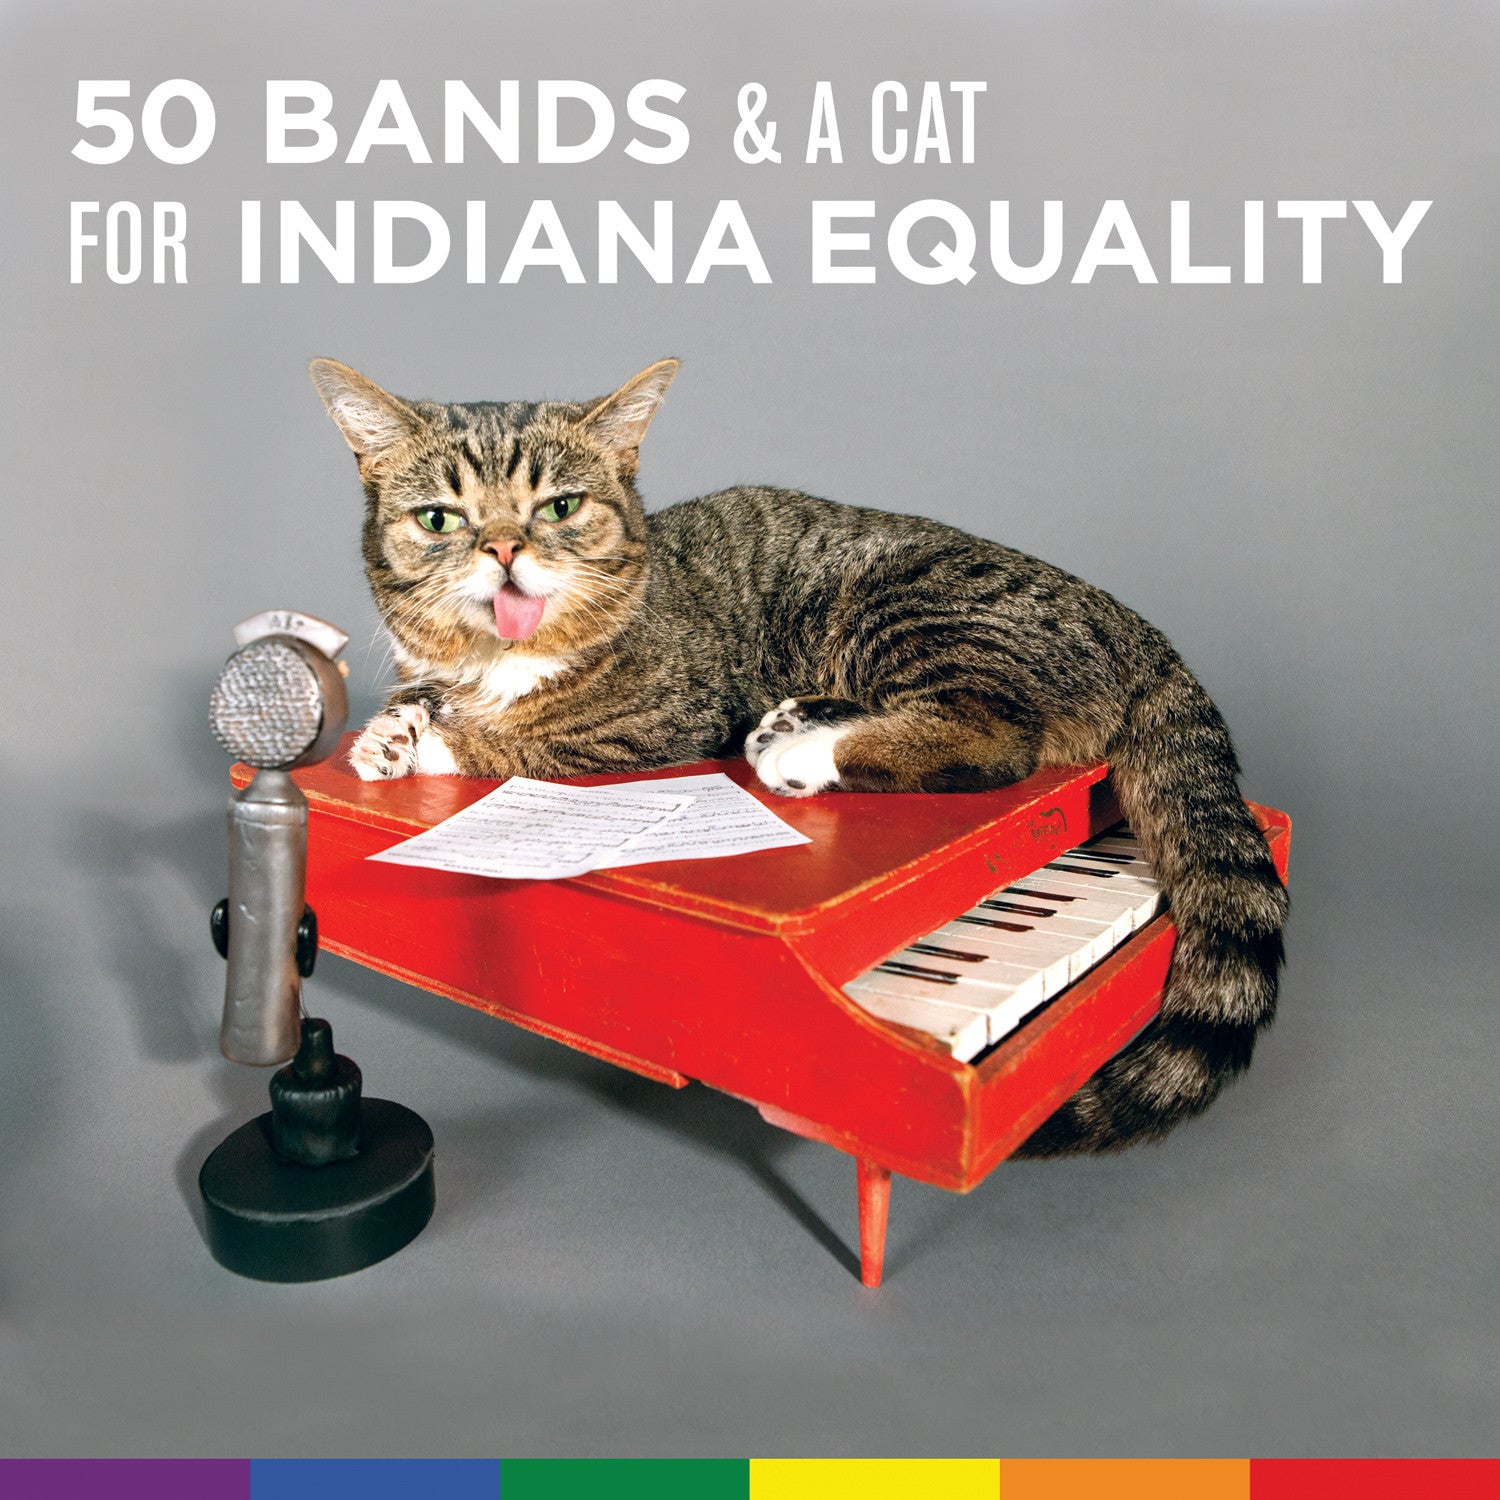 50 Bands & A Cat for Indiana Equality - Various Artists - Joyful Noise Recordings - 2